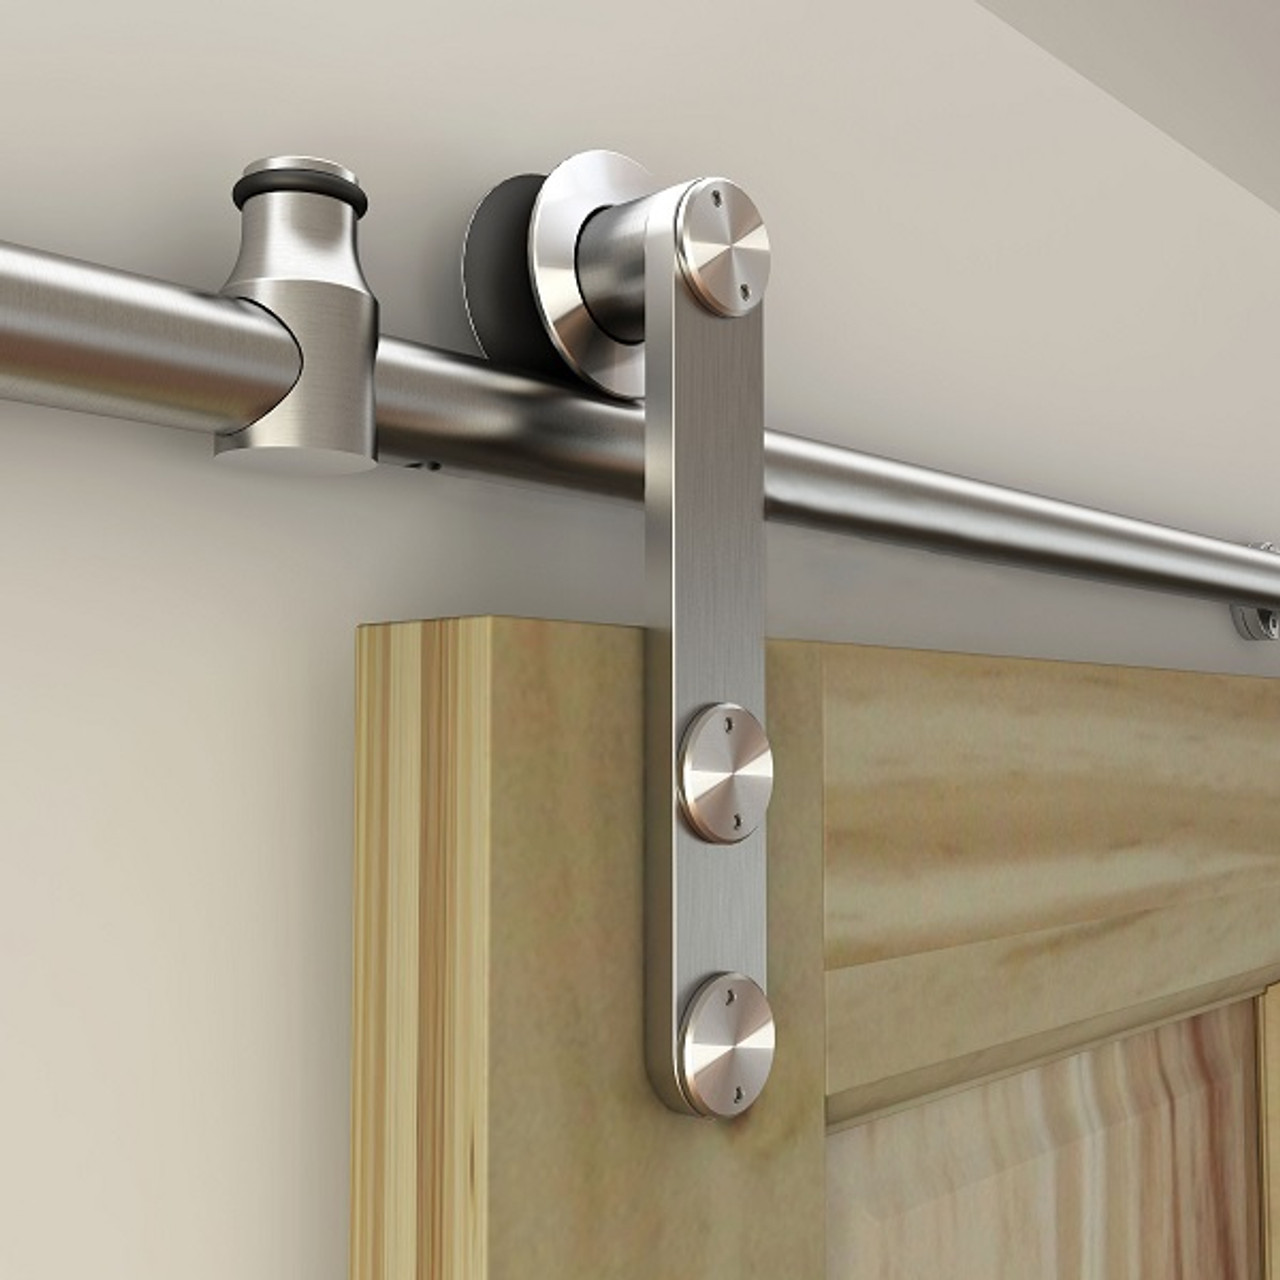 Sliding rail systems for easy access to boats and gear